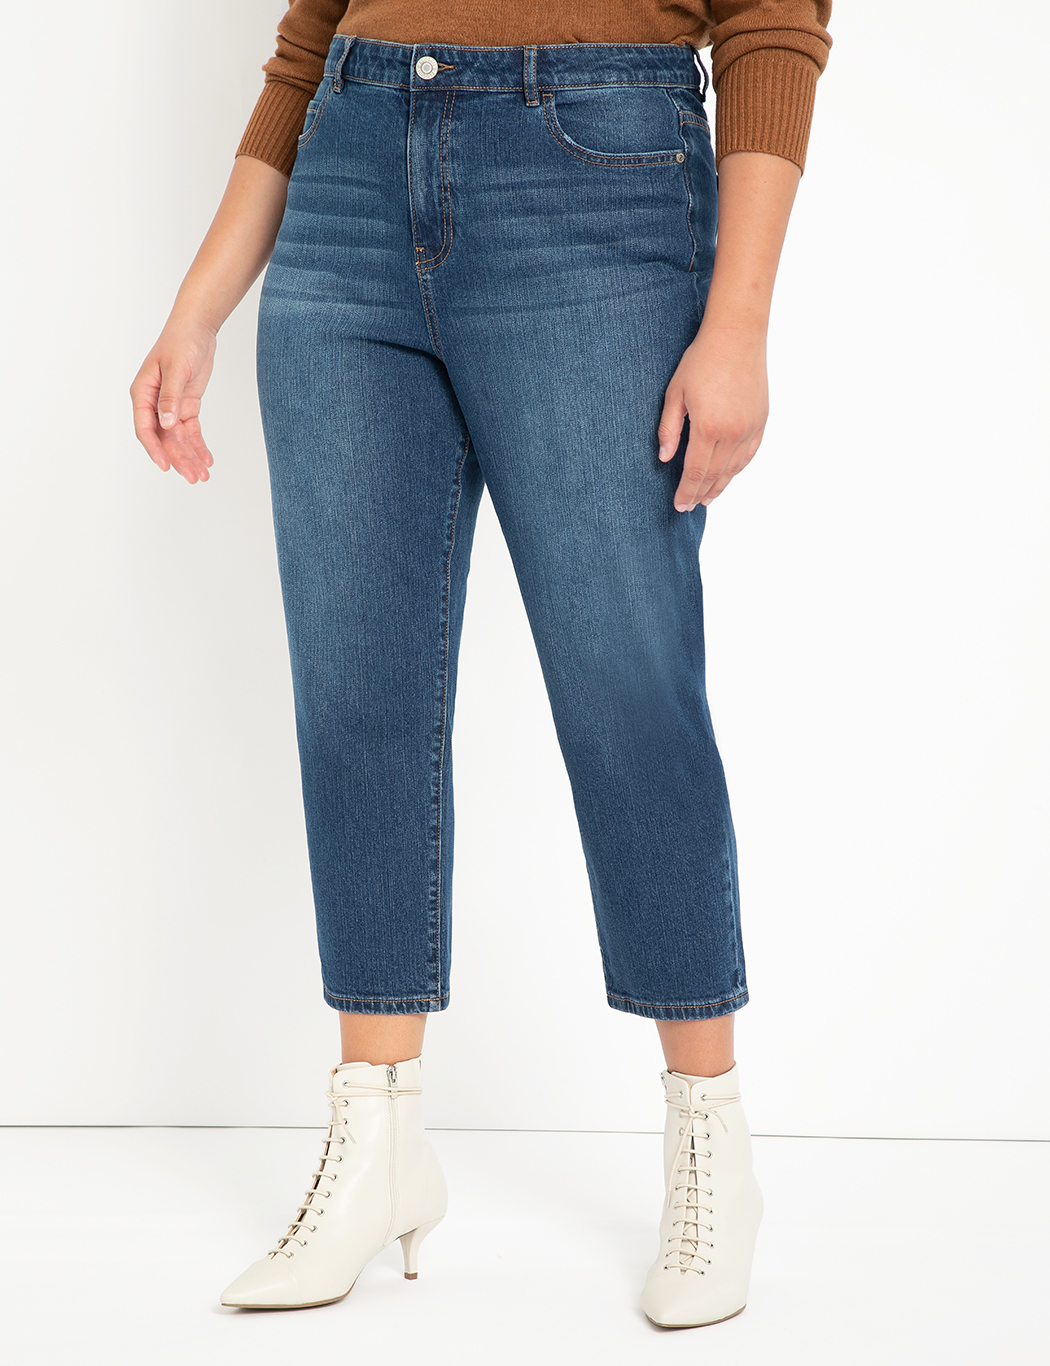 7 Cute Jean Outfits When You Have No Idea What to Wear | Who What Wear